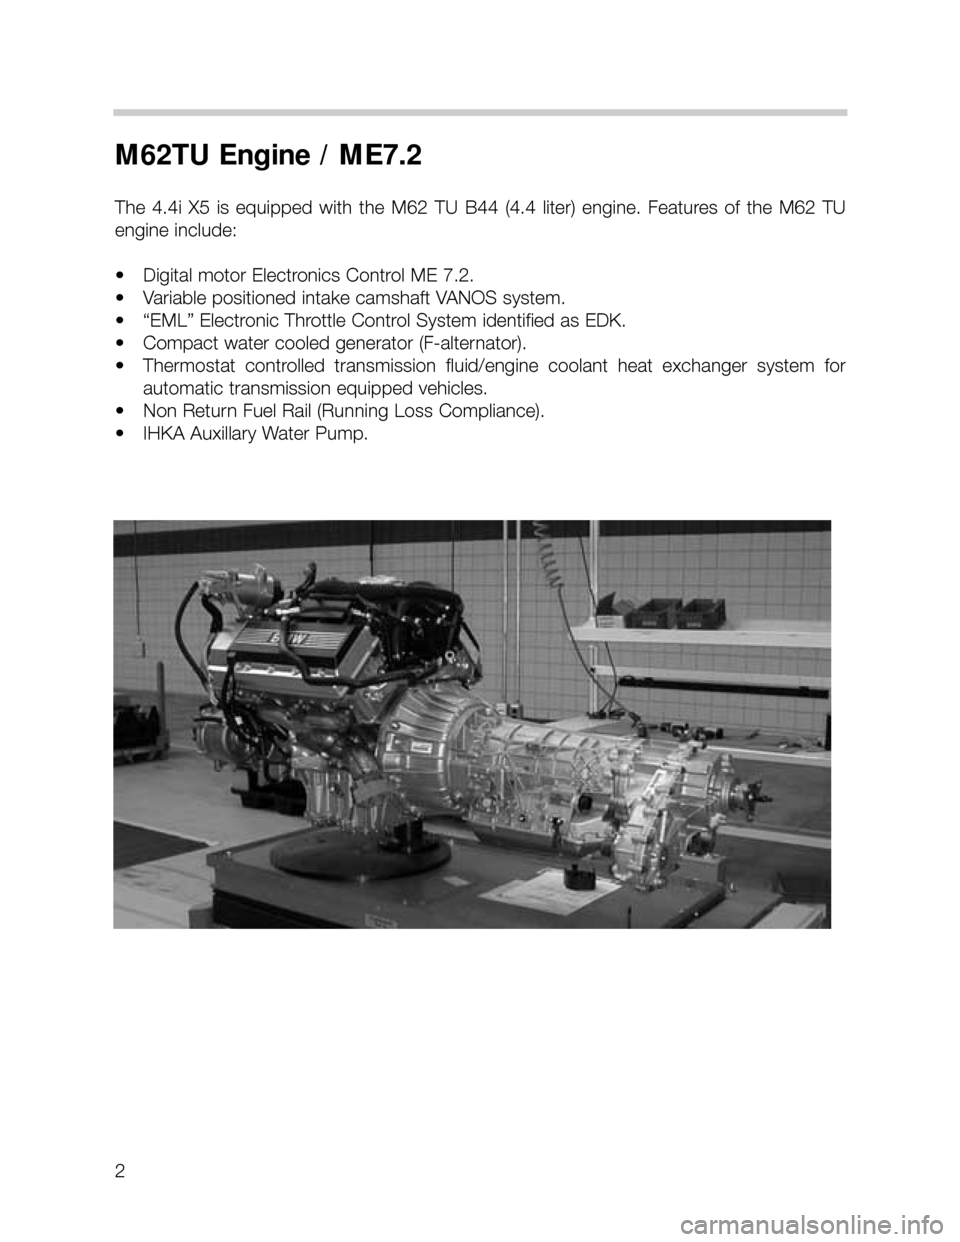 BMW X5 2005 E53 M62TU Engine Workshop Manual 2
M62TU Engine / ME7.2
The 4.4i X5 is equipped  with  the  M62  TU  B44  (4.4  liter)  engine.  Features  of  the  M62  TU
engine include:
• Digital motor Electronics Control ME 7.2.
• Variable po